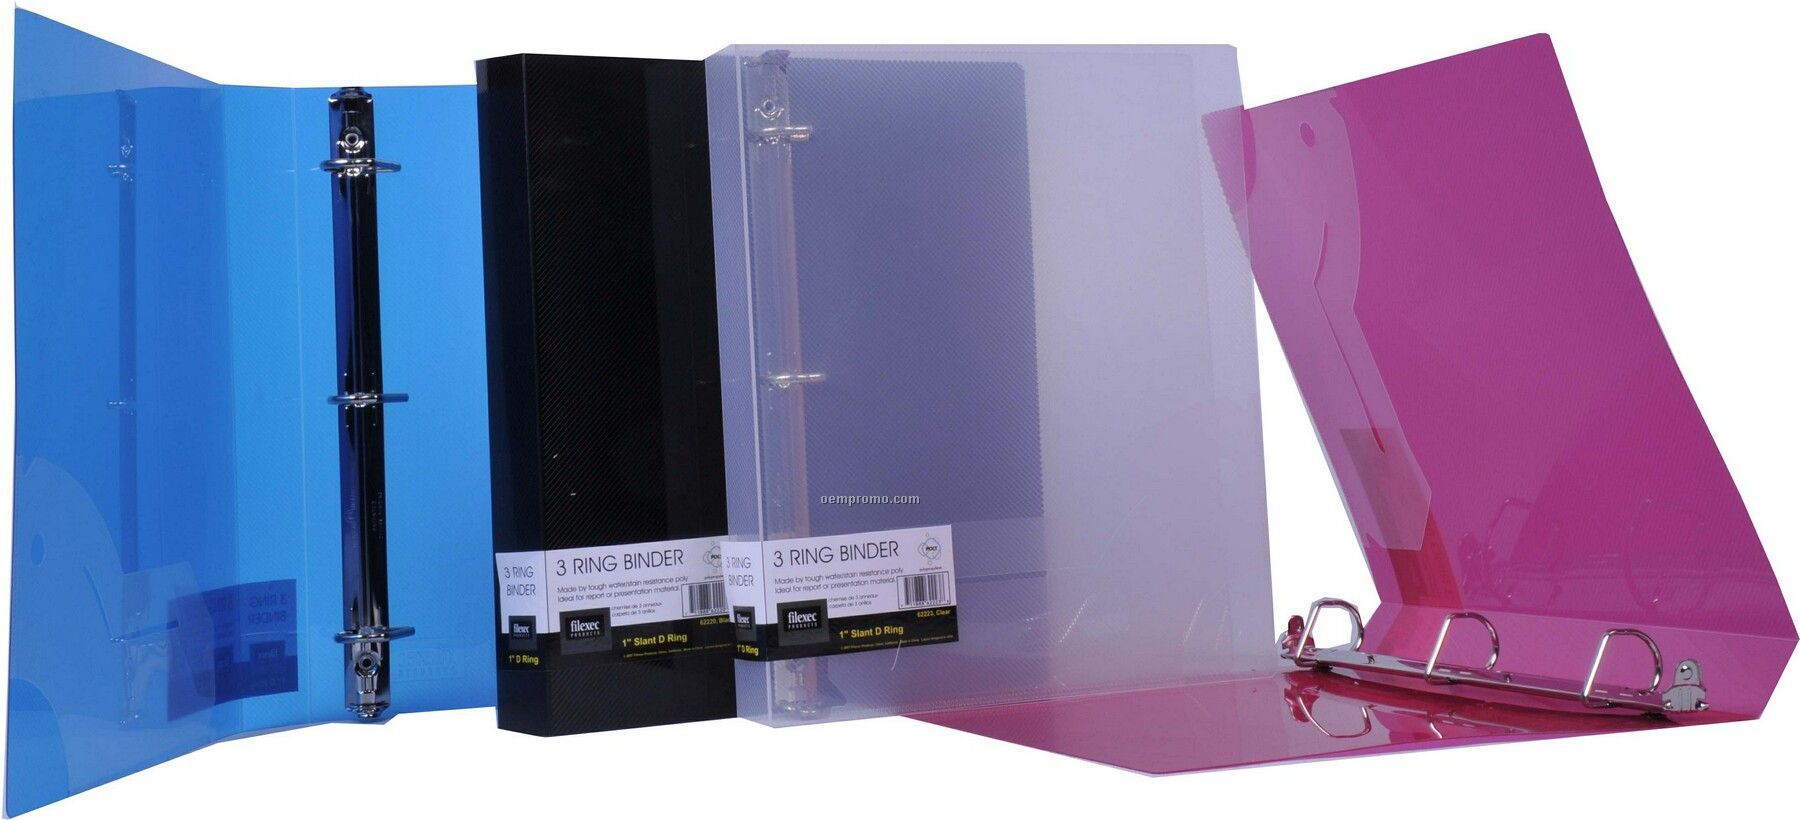 Translucent Blue D-ring Binder With 1" Ring